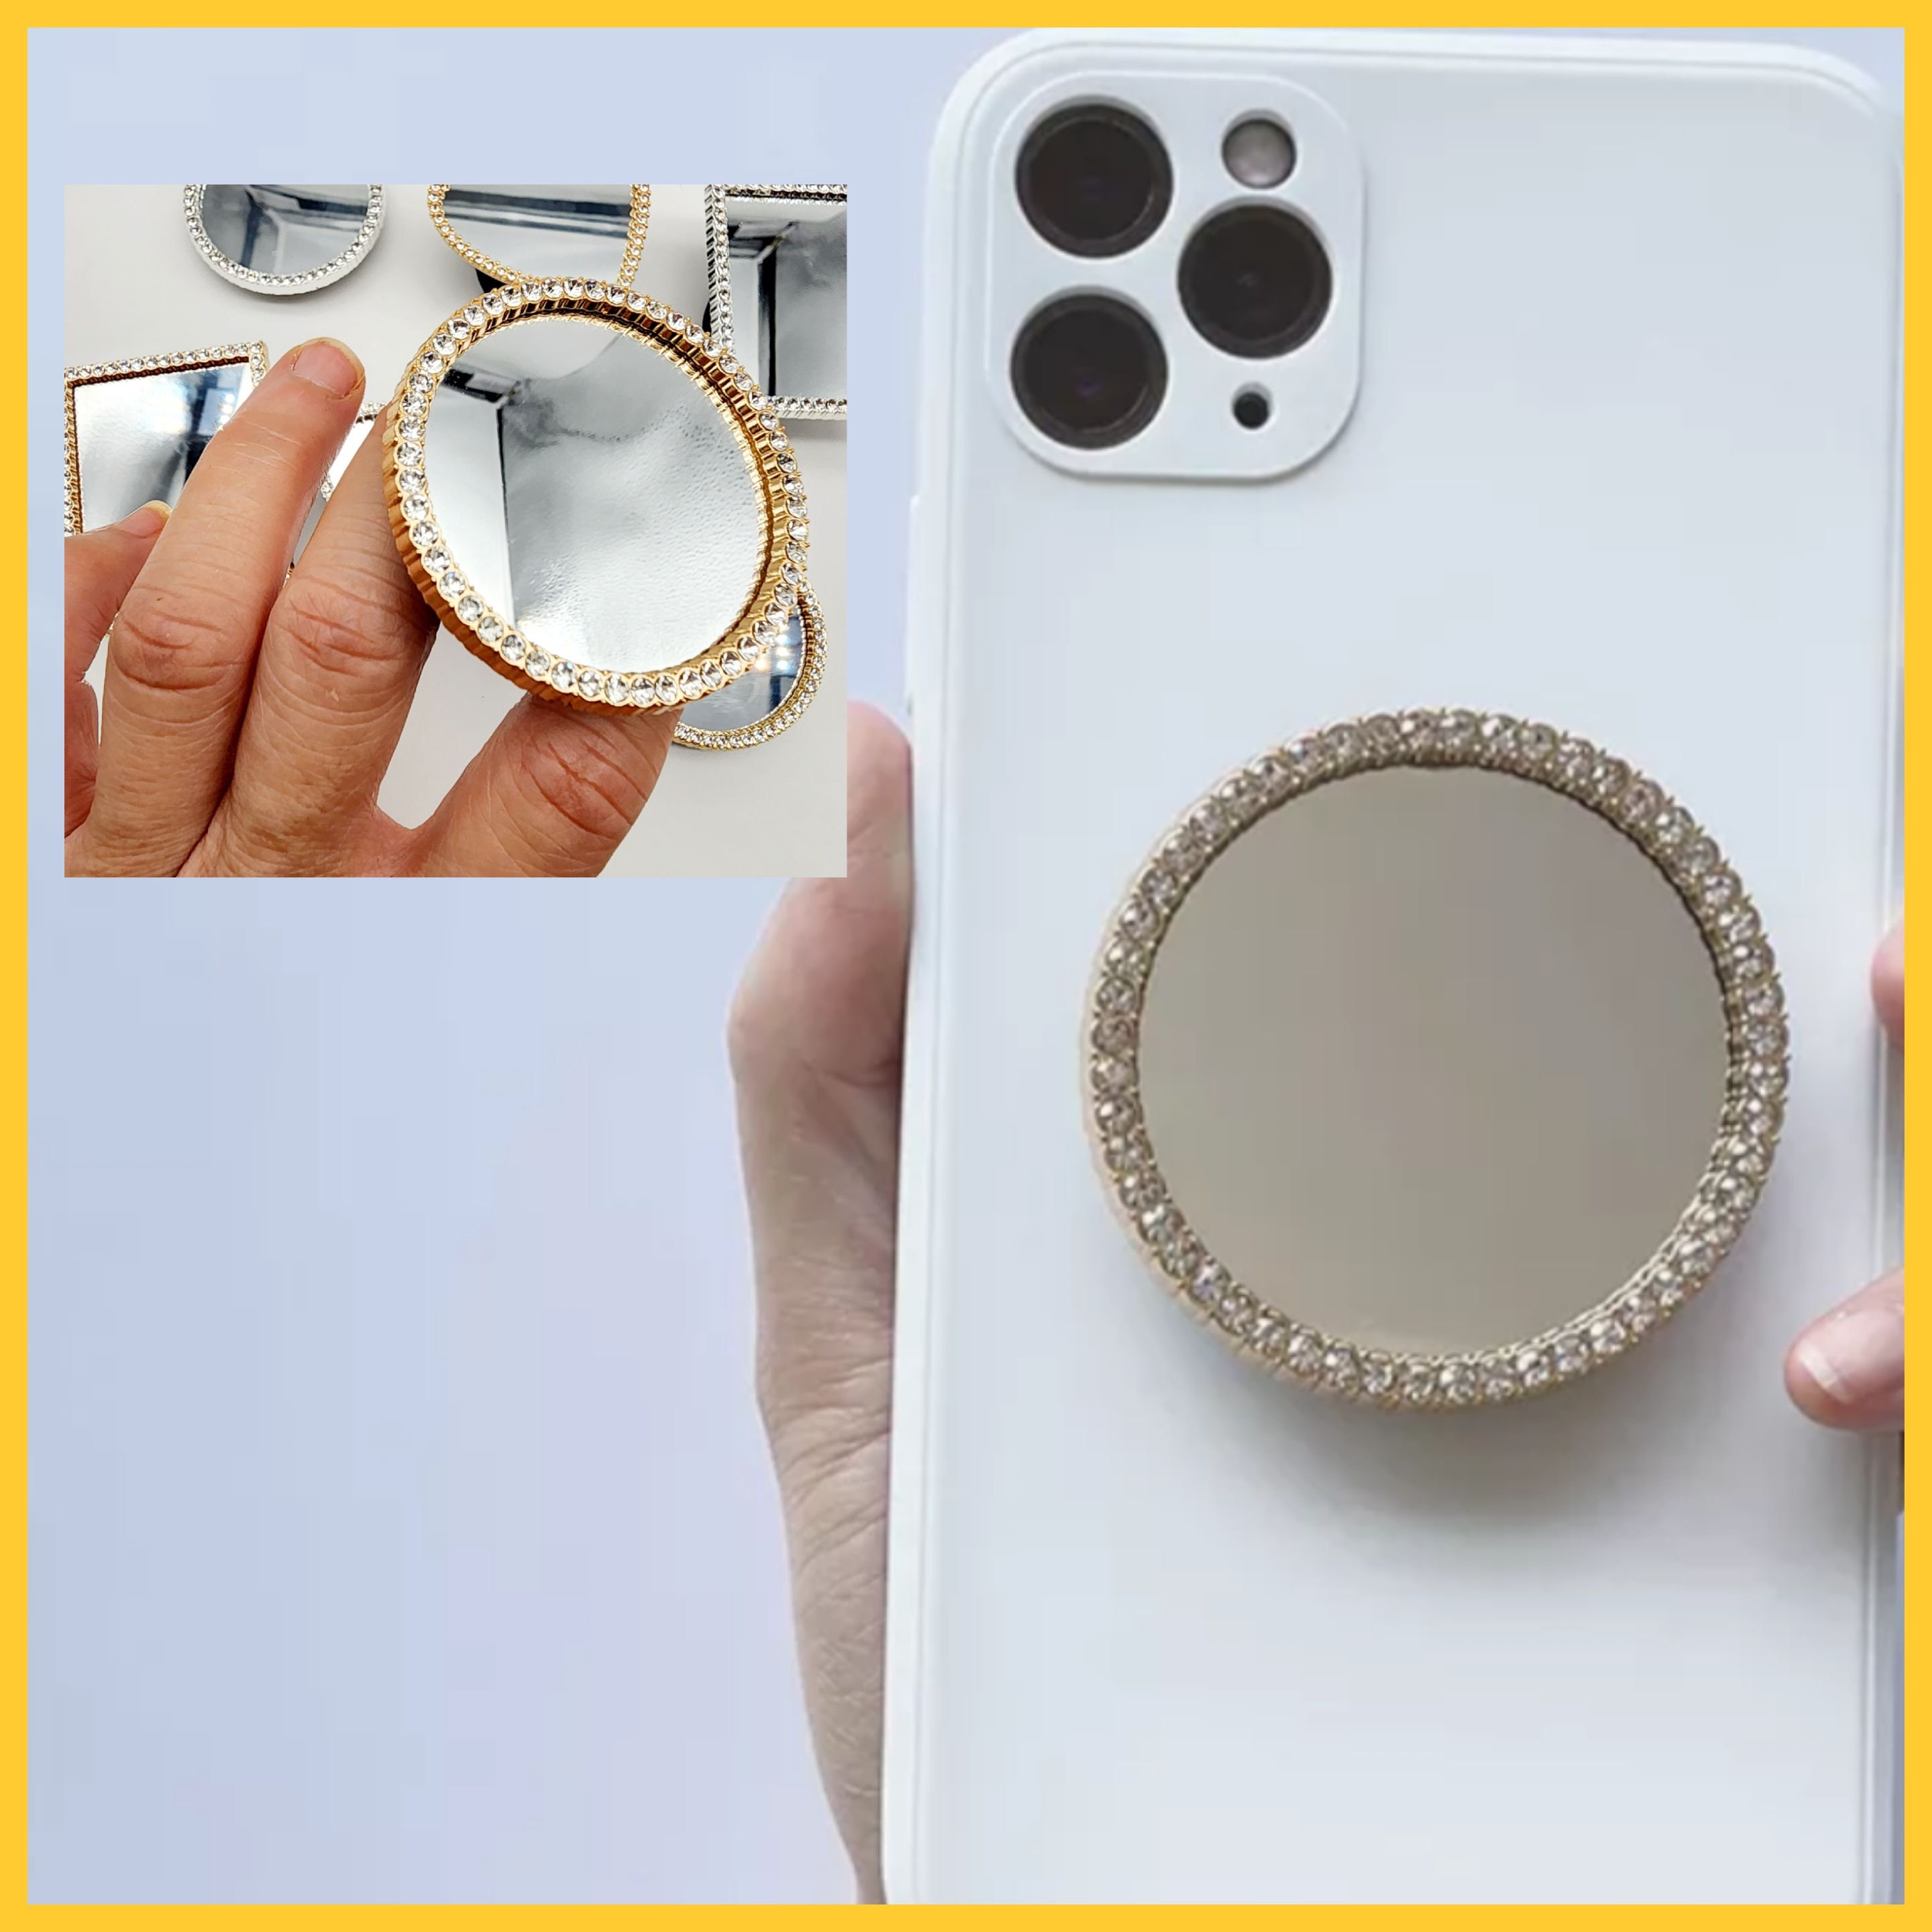 Customizing your Popsockets and badge Reels with one siders 